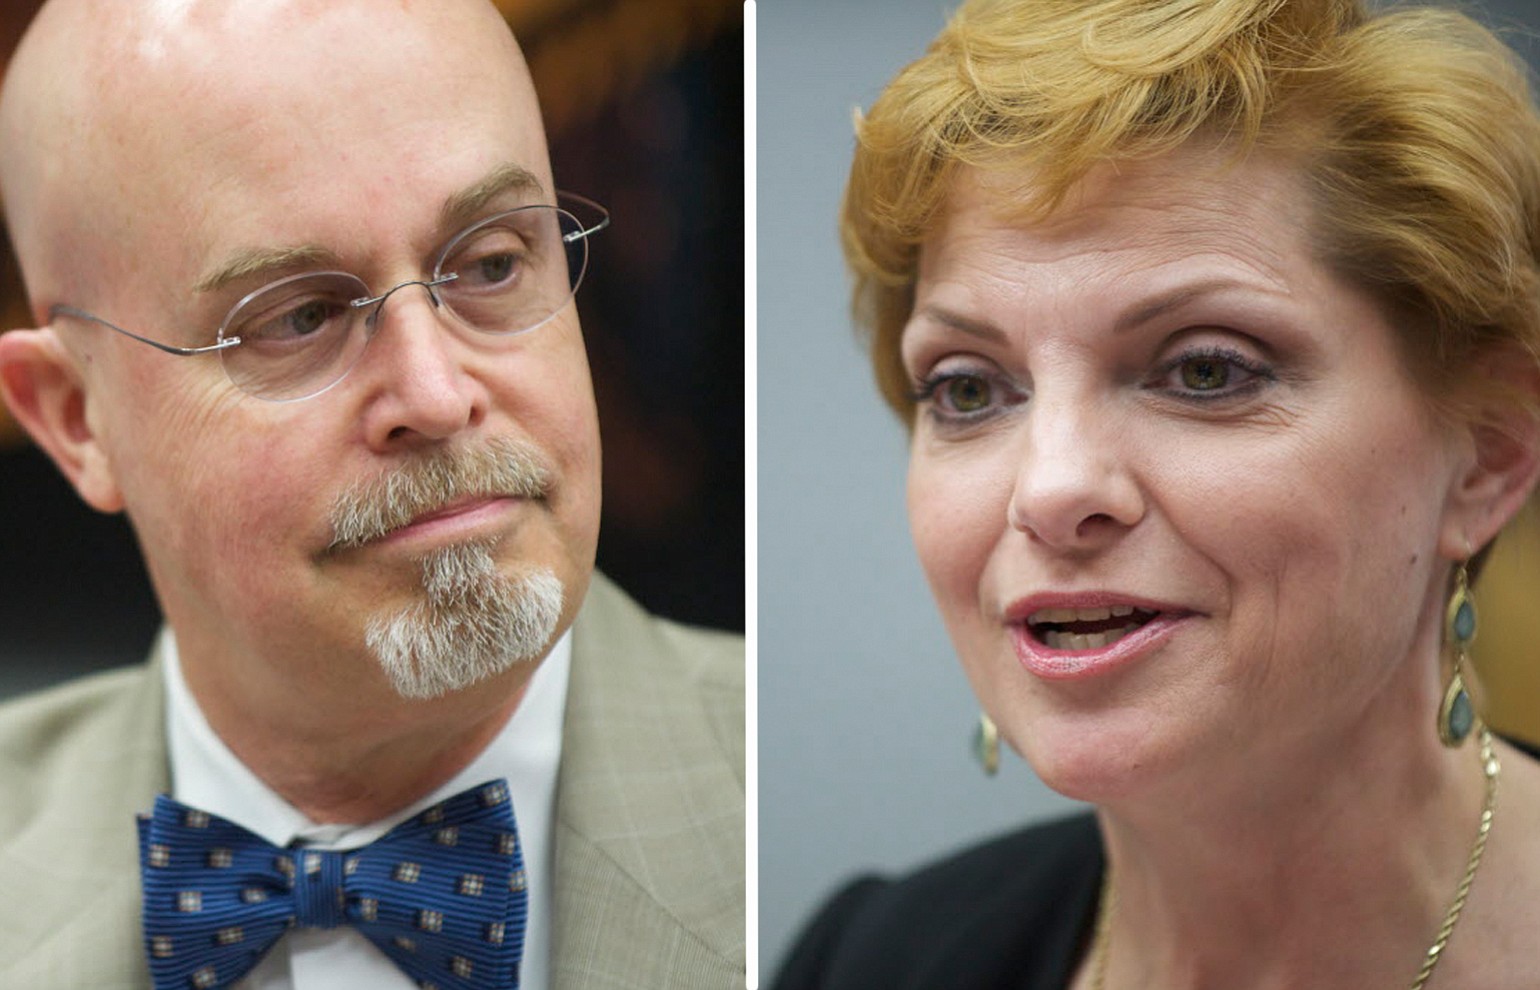 49th District, Position 2 candidates: Incumbent Jim Moeller (D) and Lisa Ross (R).